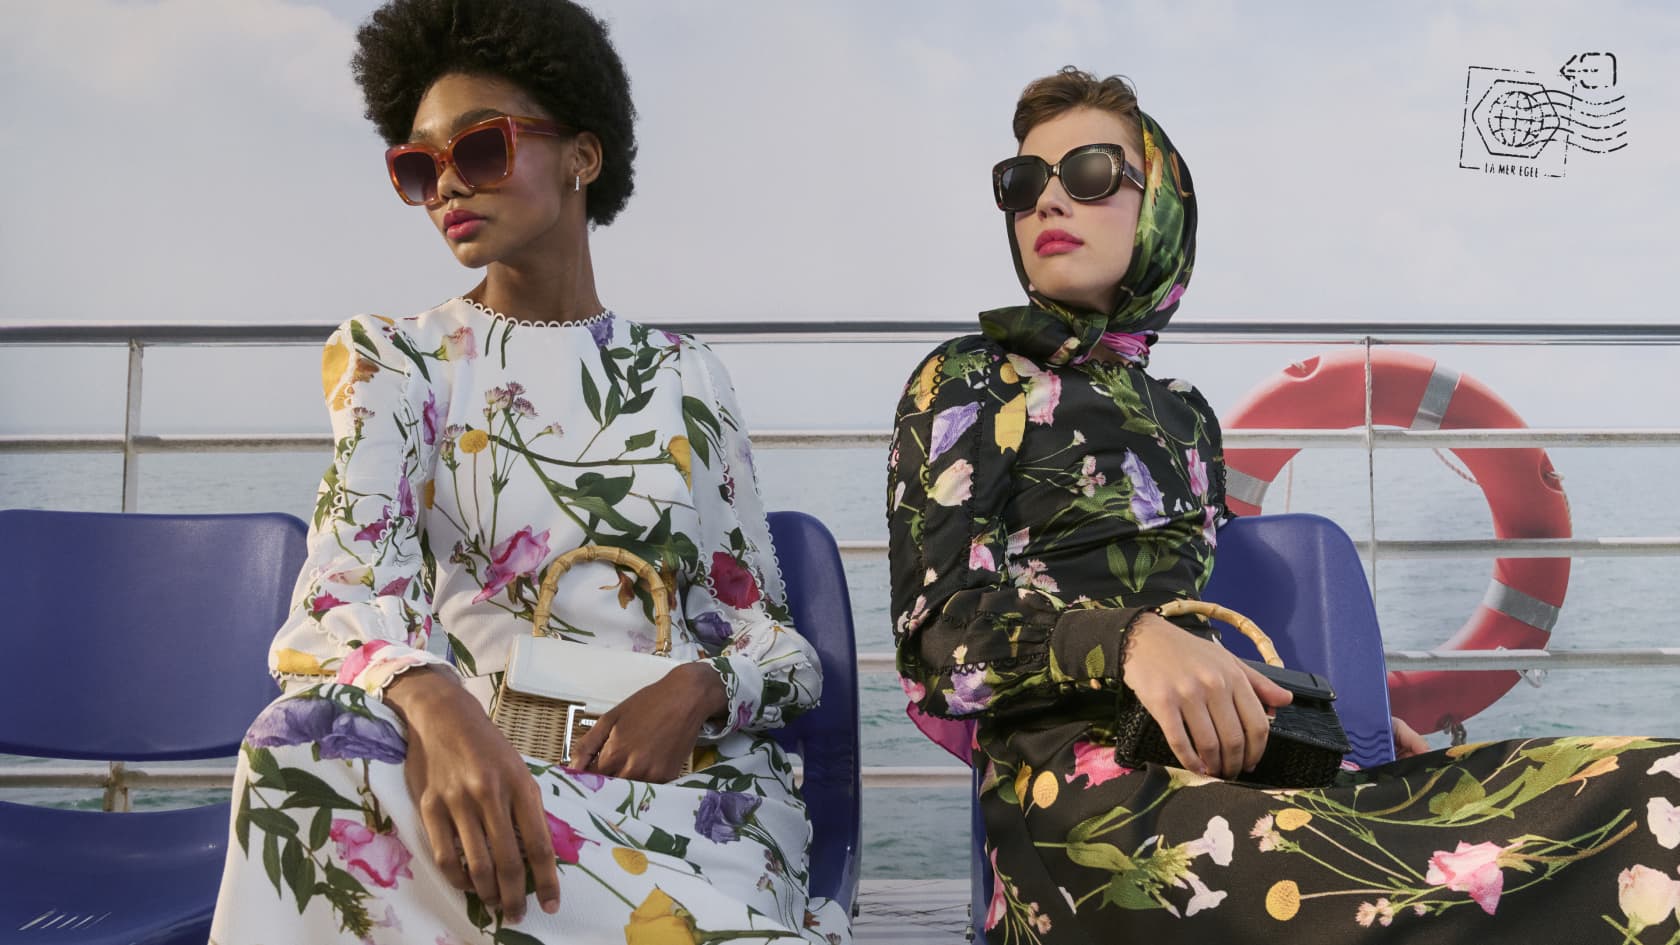 Women on ferry in Ted Baker printed dresses